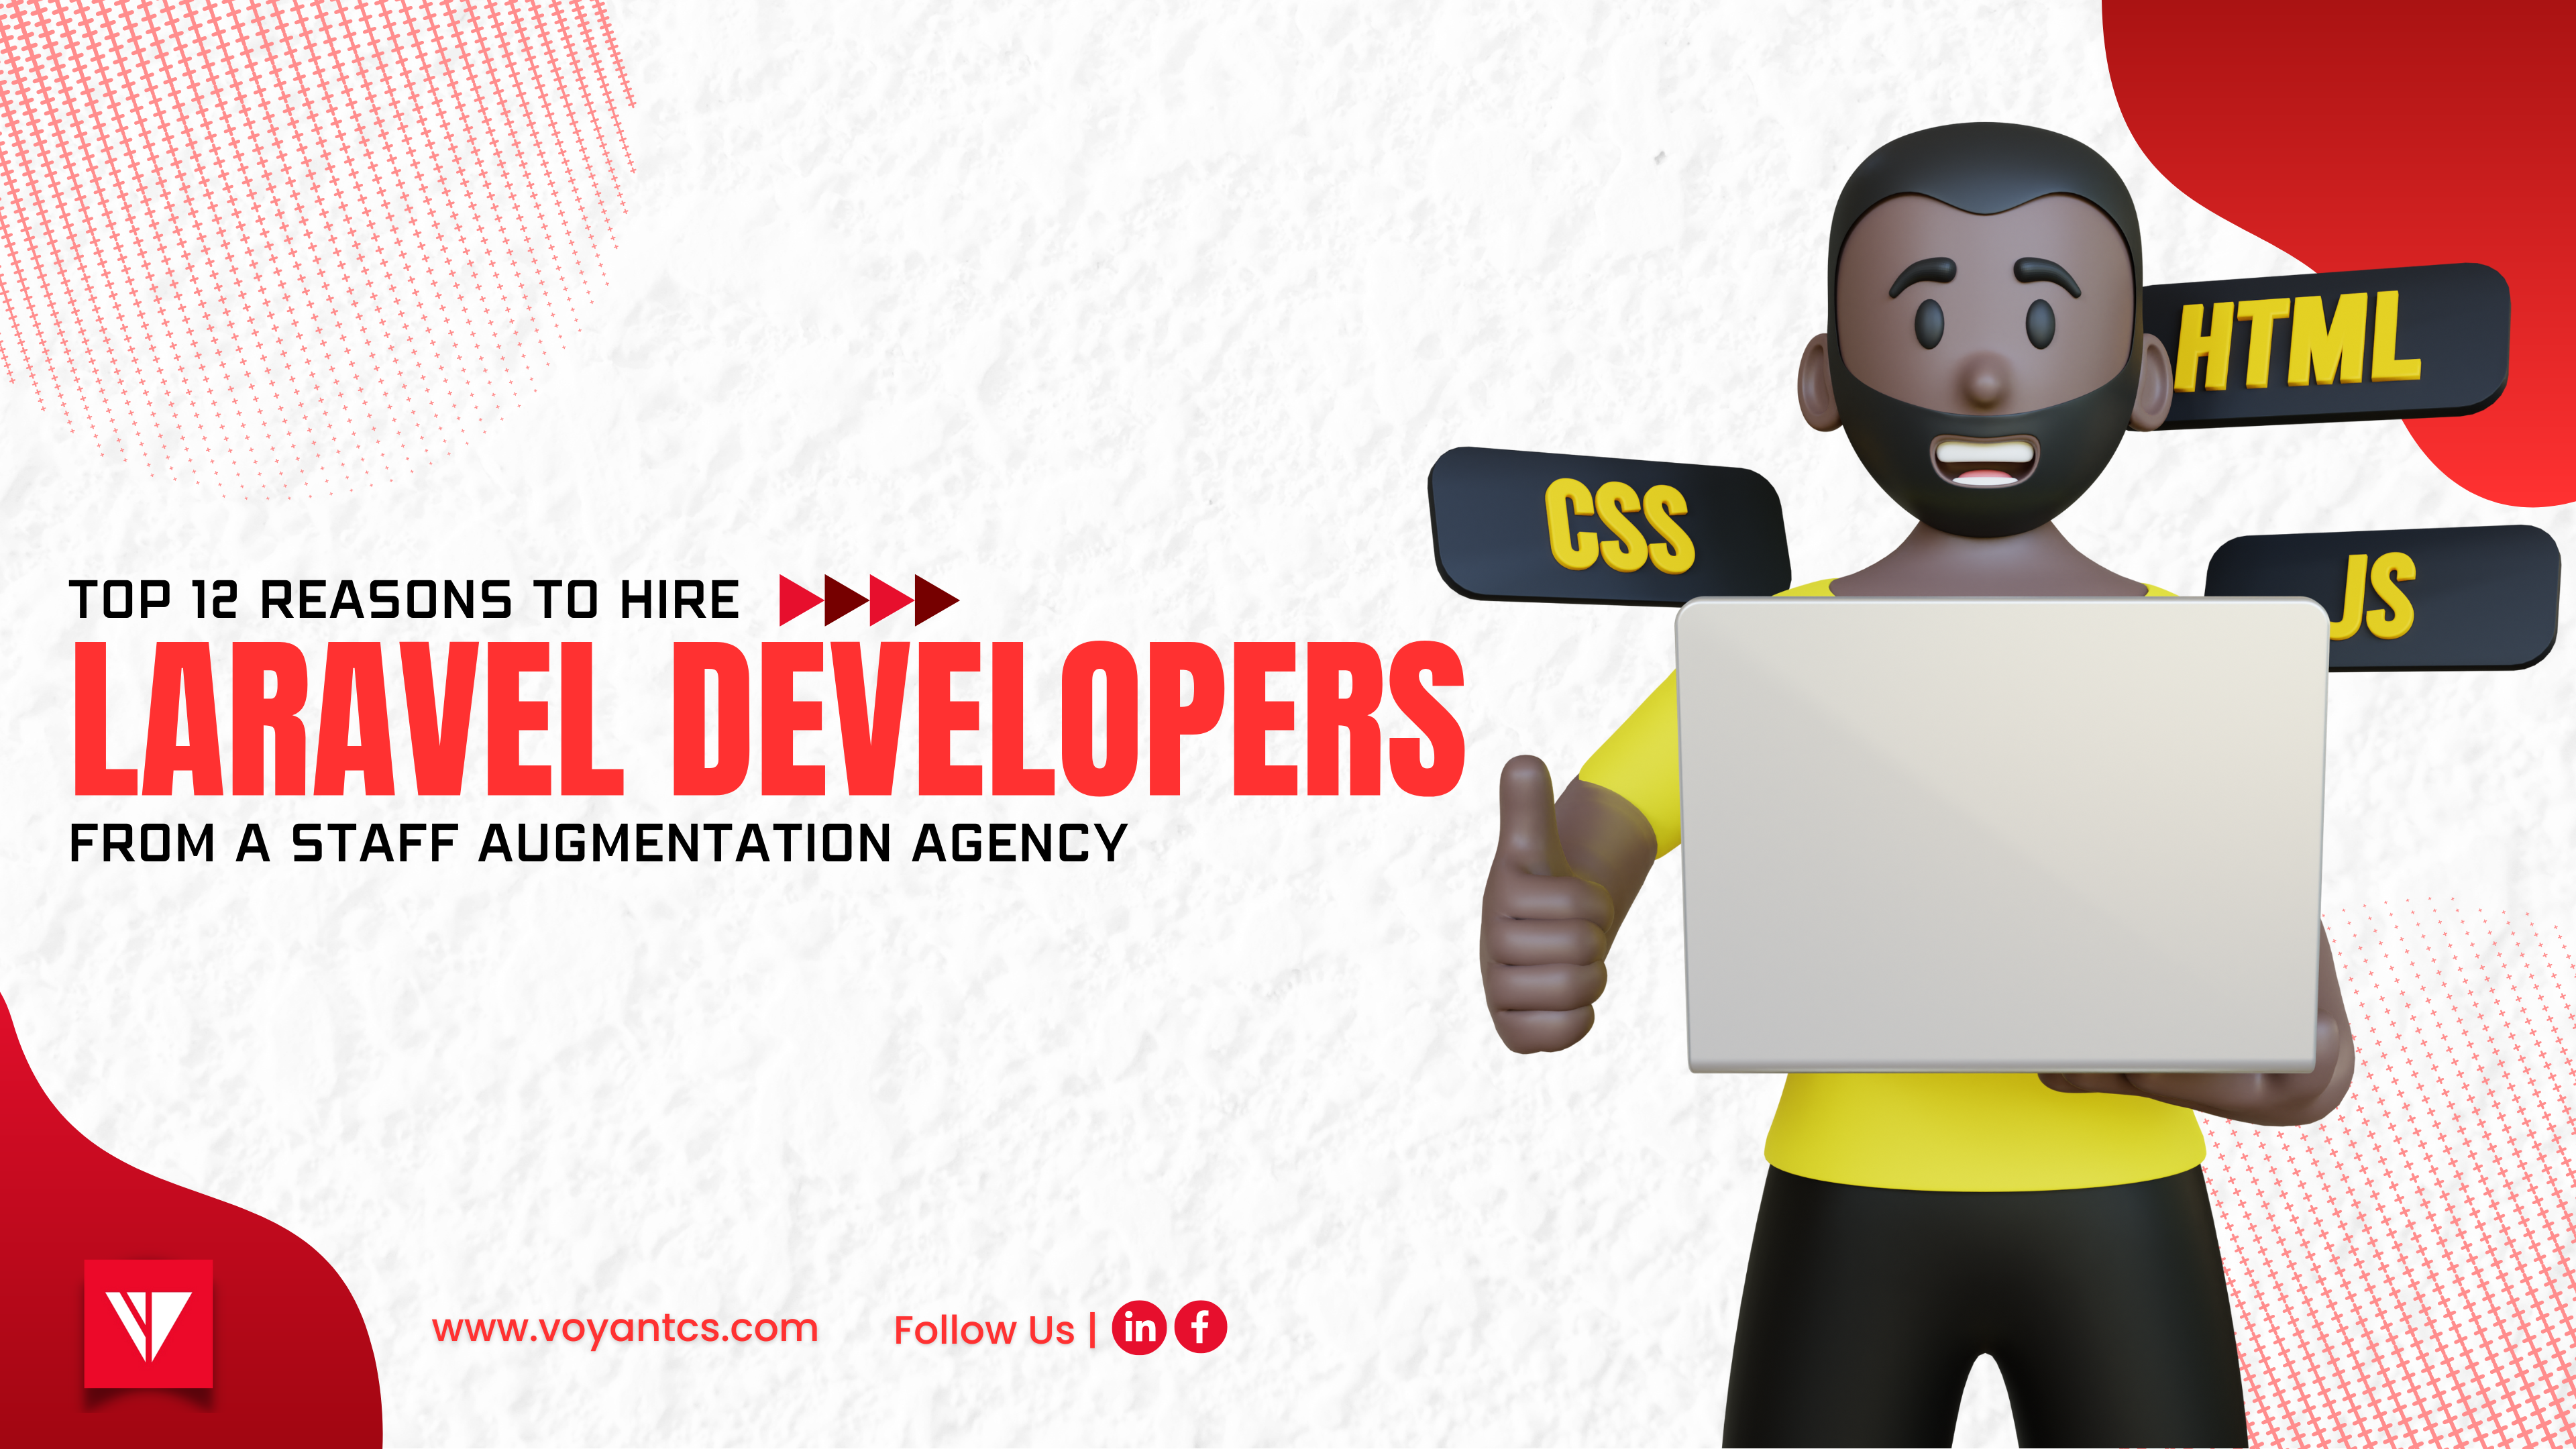 Top 12 Reasons to Hire Laravel Developers from a Staff Augmentation Agency